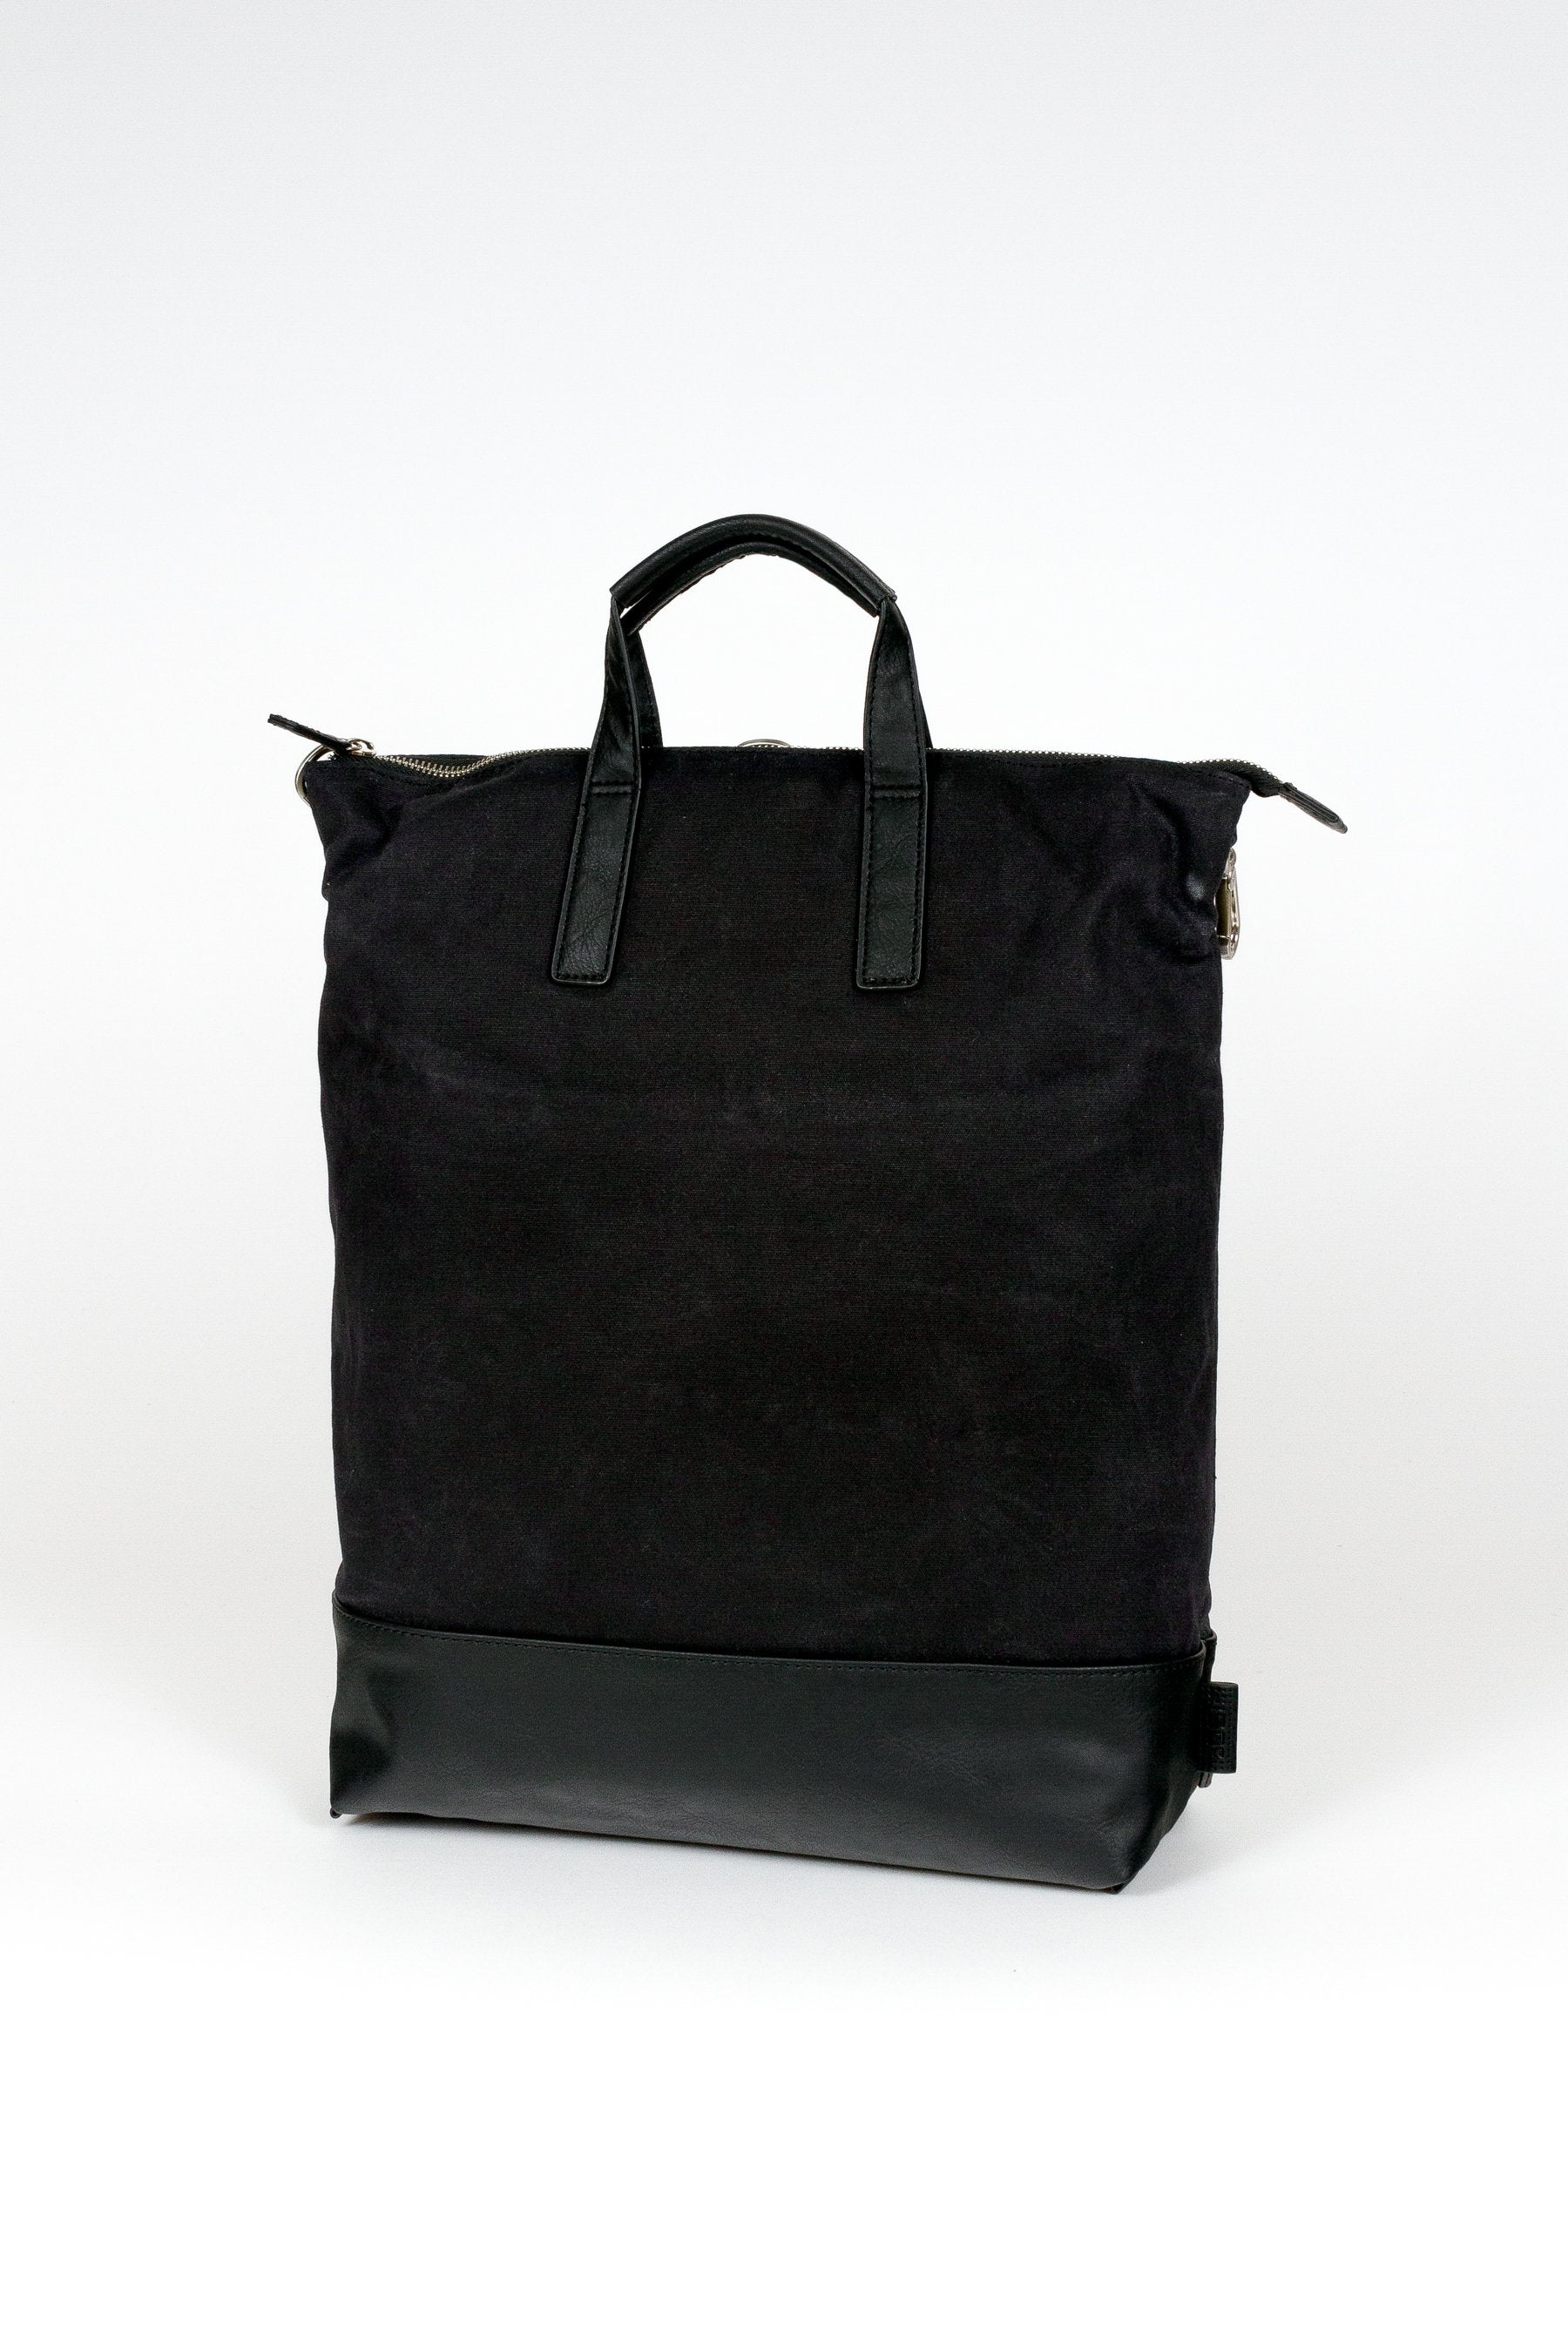 BEON.COM.AU The Jost Göteborg X-Change Small vegan 3-in-one tote bag. Made from cotton, linen and bast, waxed finish Main compartments, Inner compartments with organizer, zipper closure, Fits up to 15" Laptop and A4 documents Zip closure outer compartment Back strap and shoulder strap adjustable and rem... Jost at BEON.COM.AU